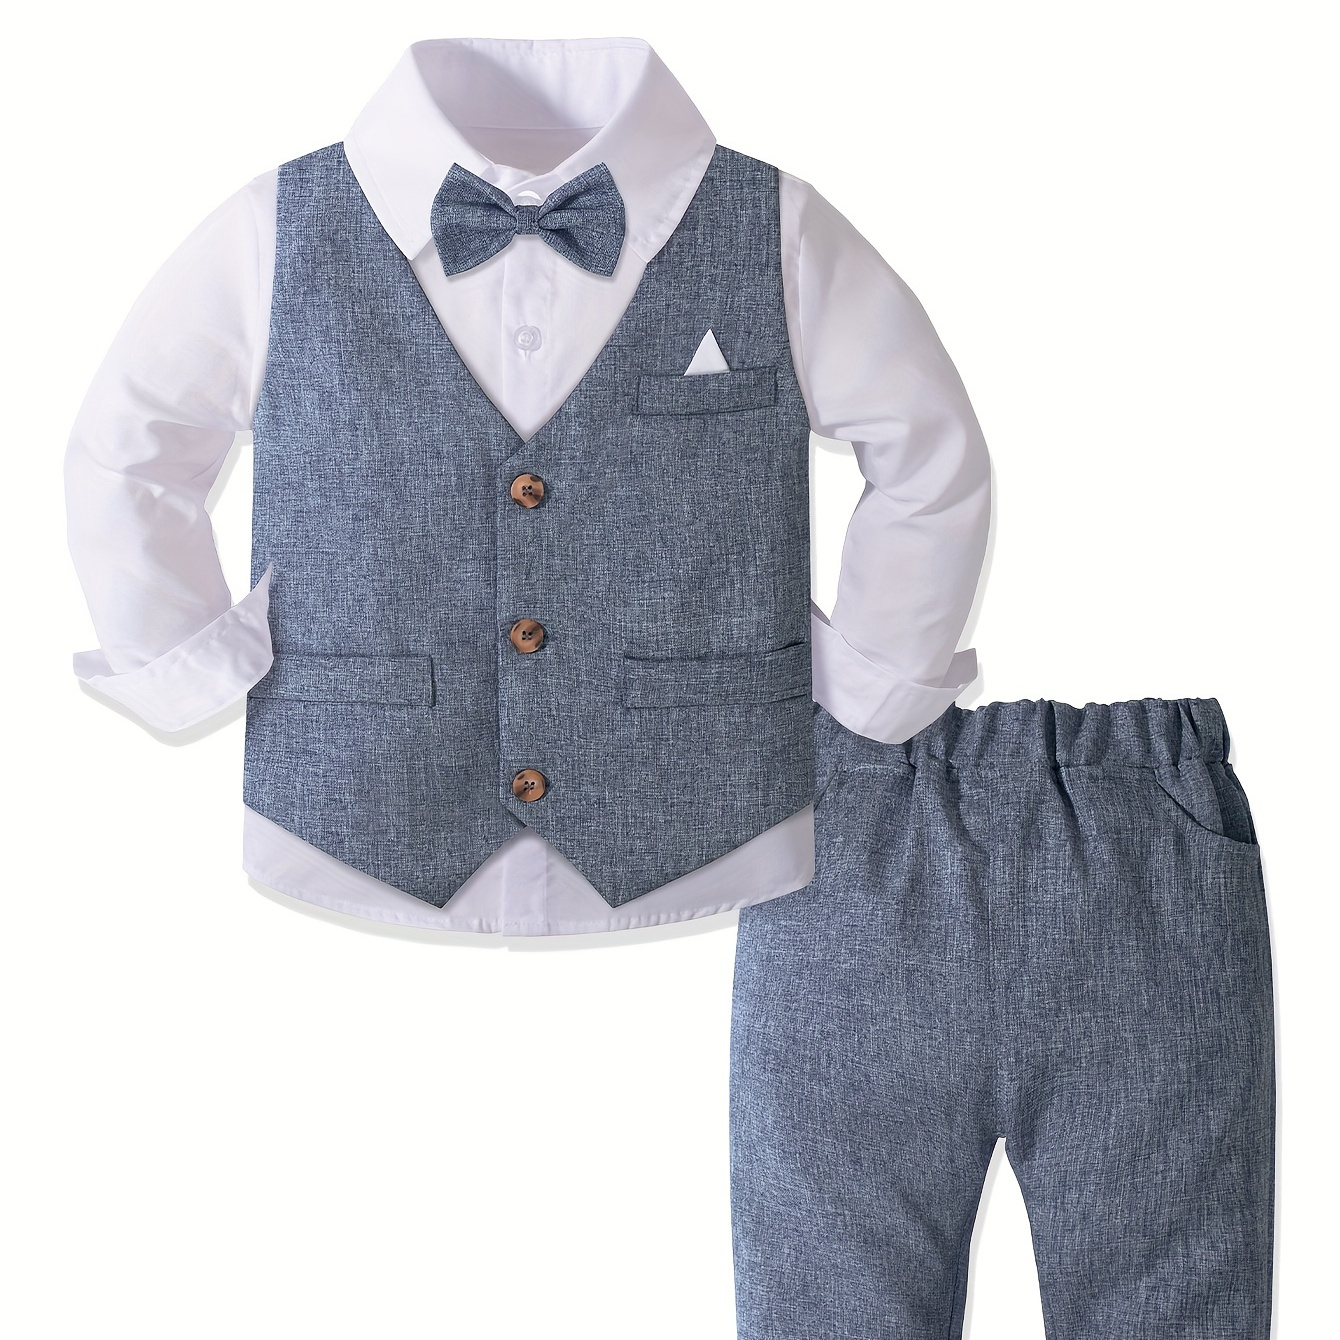 

4pcs Boy's Gentleman Outfit, Bowtie & Shirt & Vest & Pants Set, Formal Wear For Speech Performance Birthday Party, Kid's Clothes For Spring Fall Winter